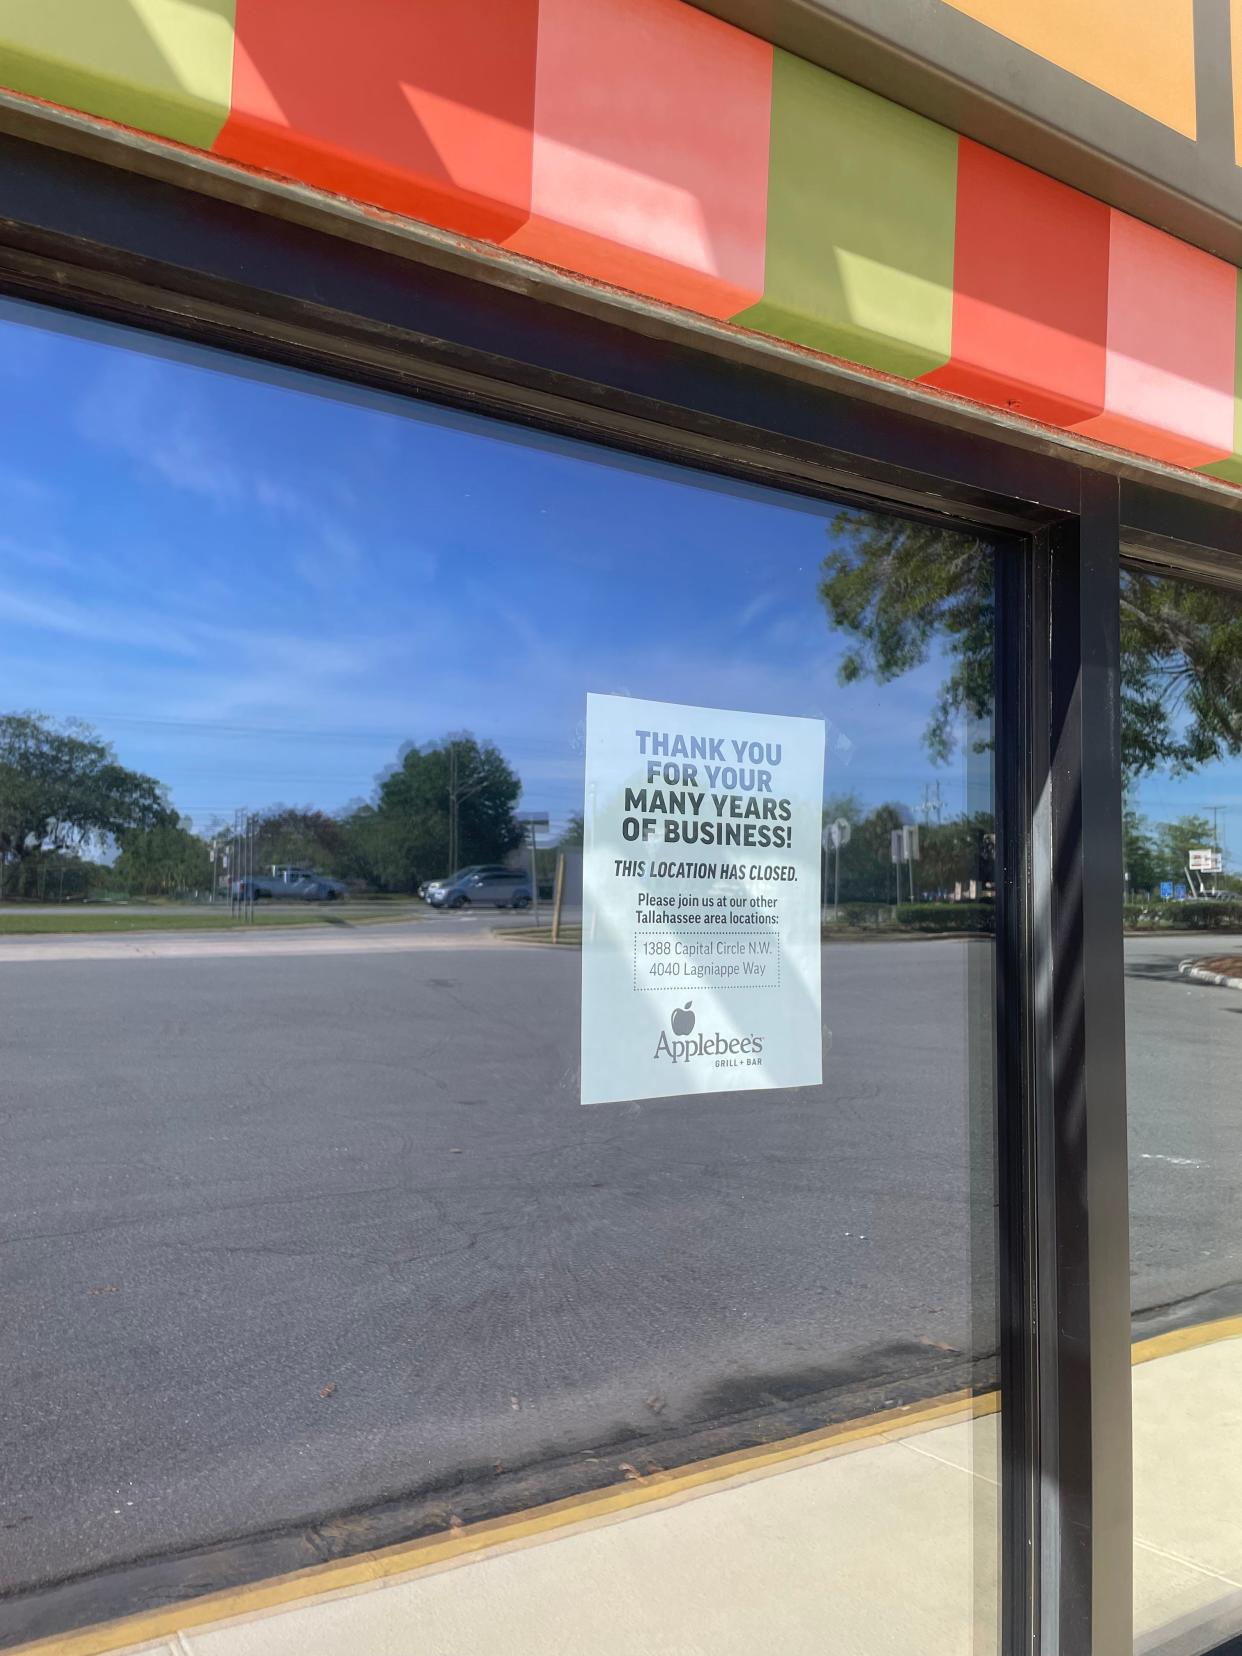 Applebee’s Grill + Bar on 1355 Apalachee Parkway has permanently closed their doors.